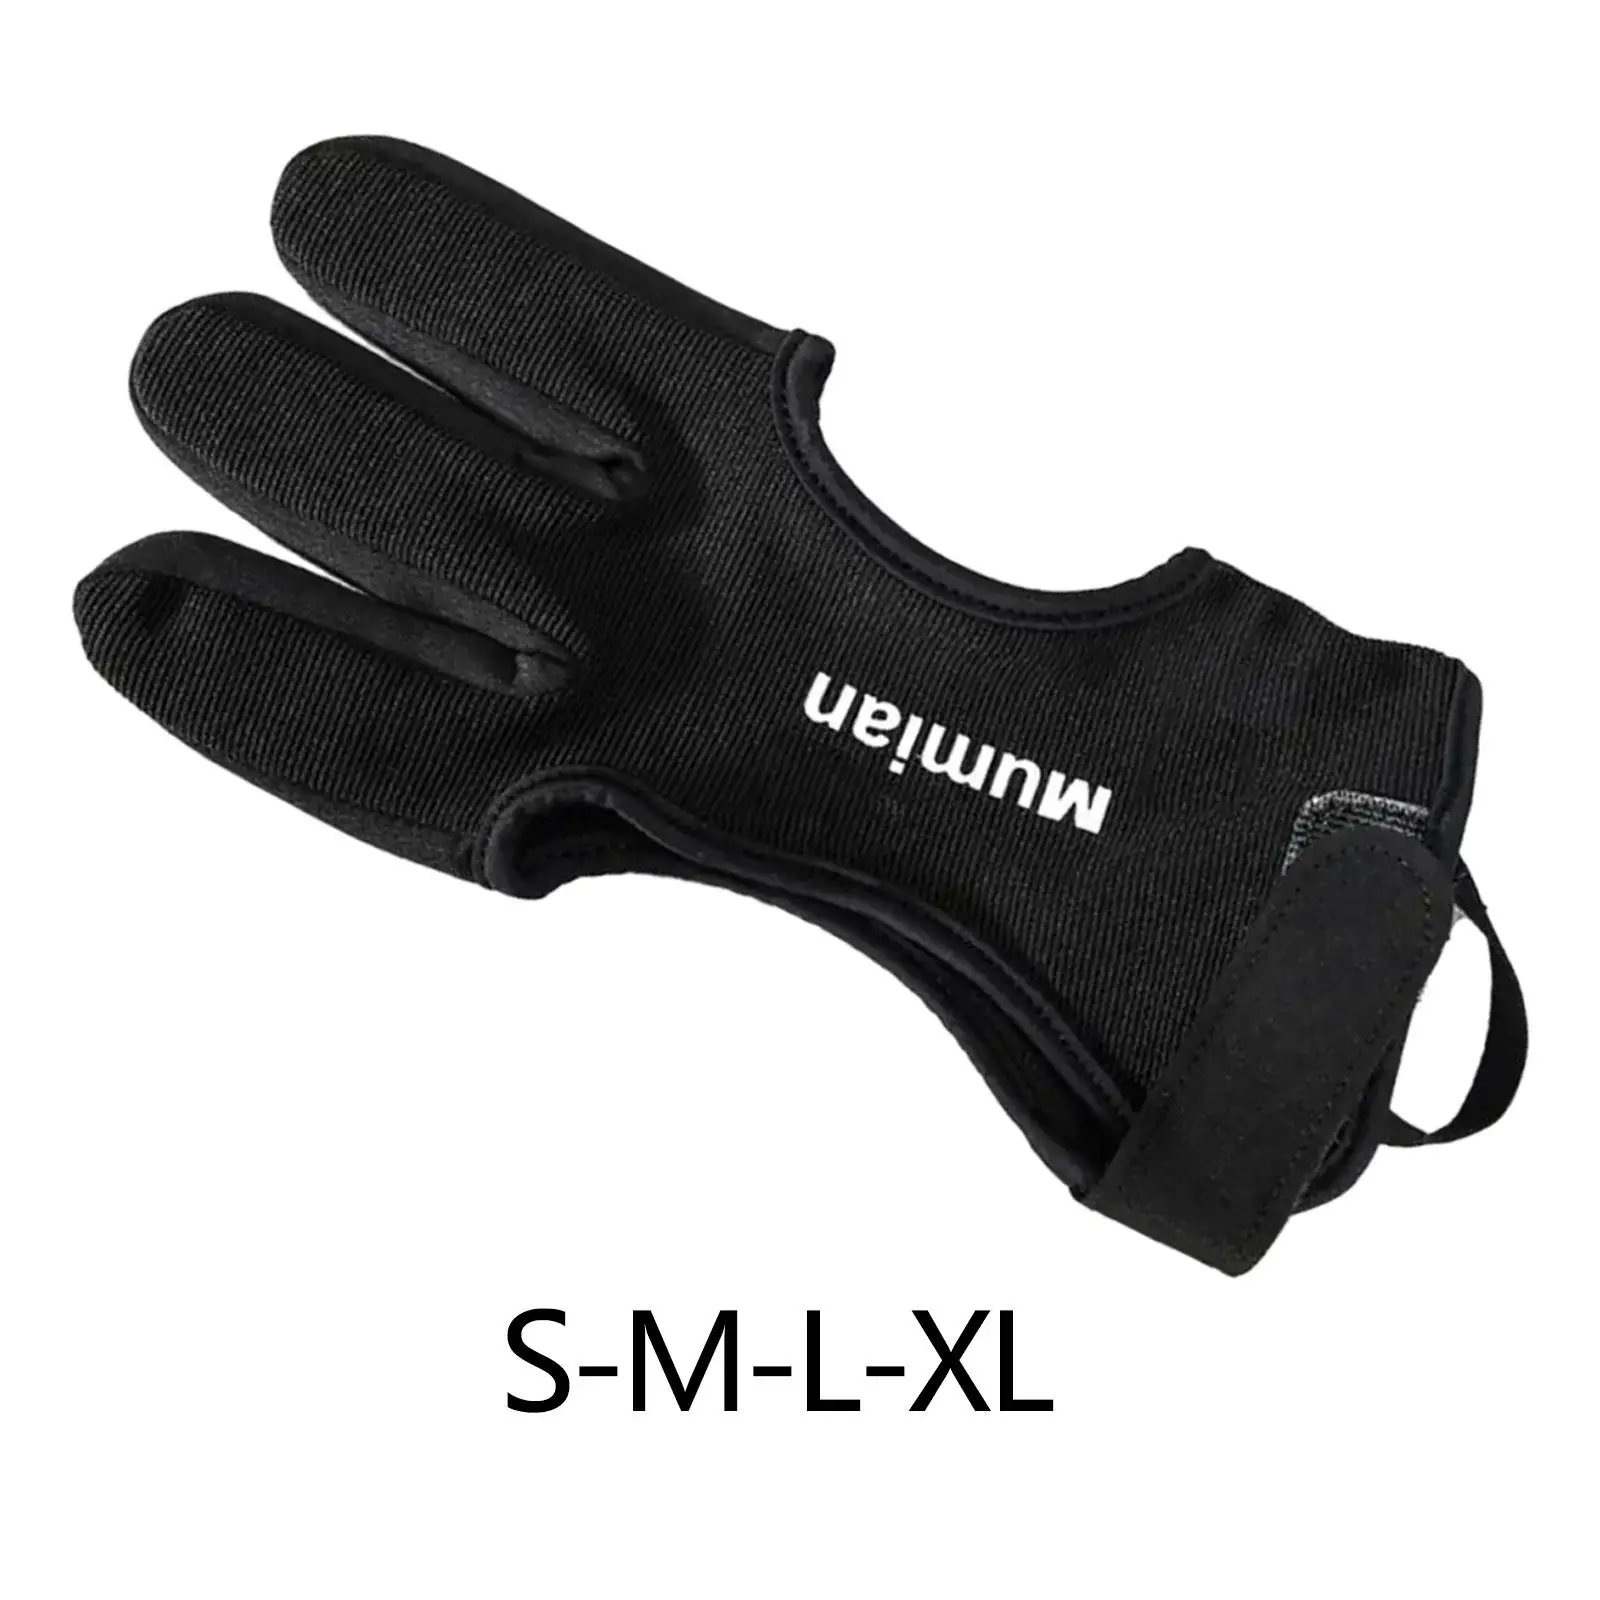 Archery Glove Finger Tab Accessories, PU Leather Tips for Recurve and Compound,